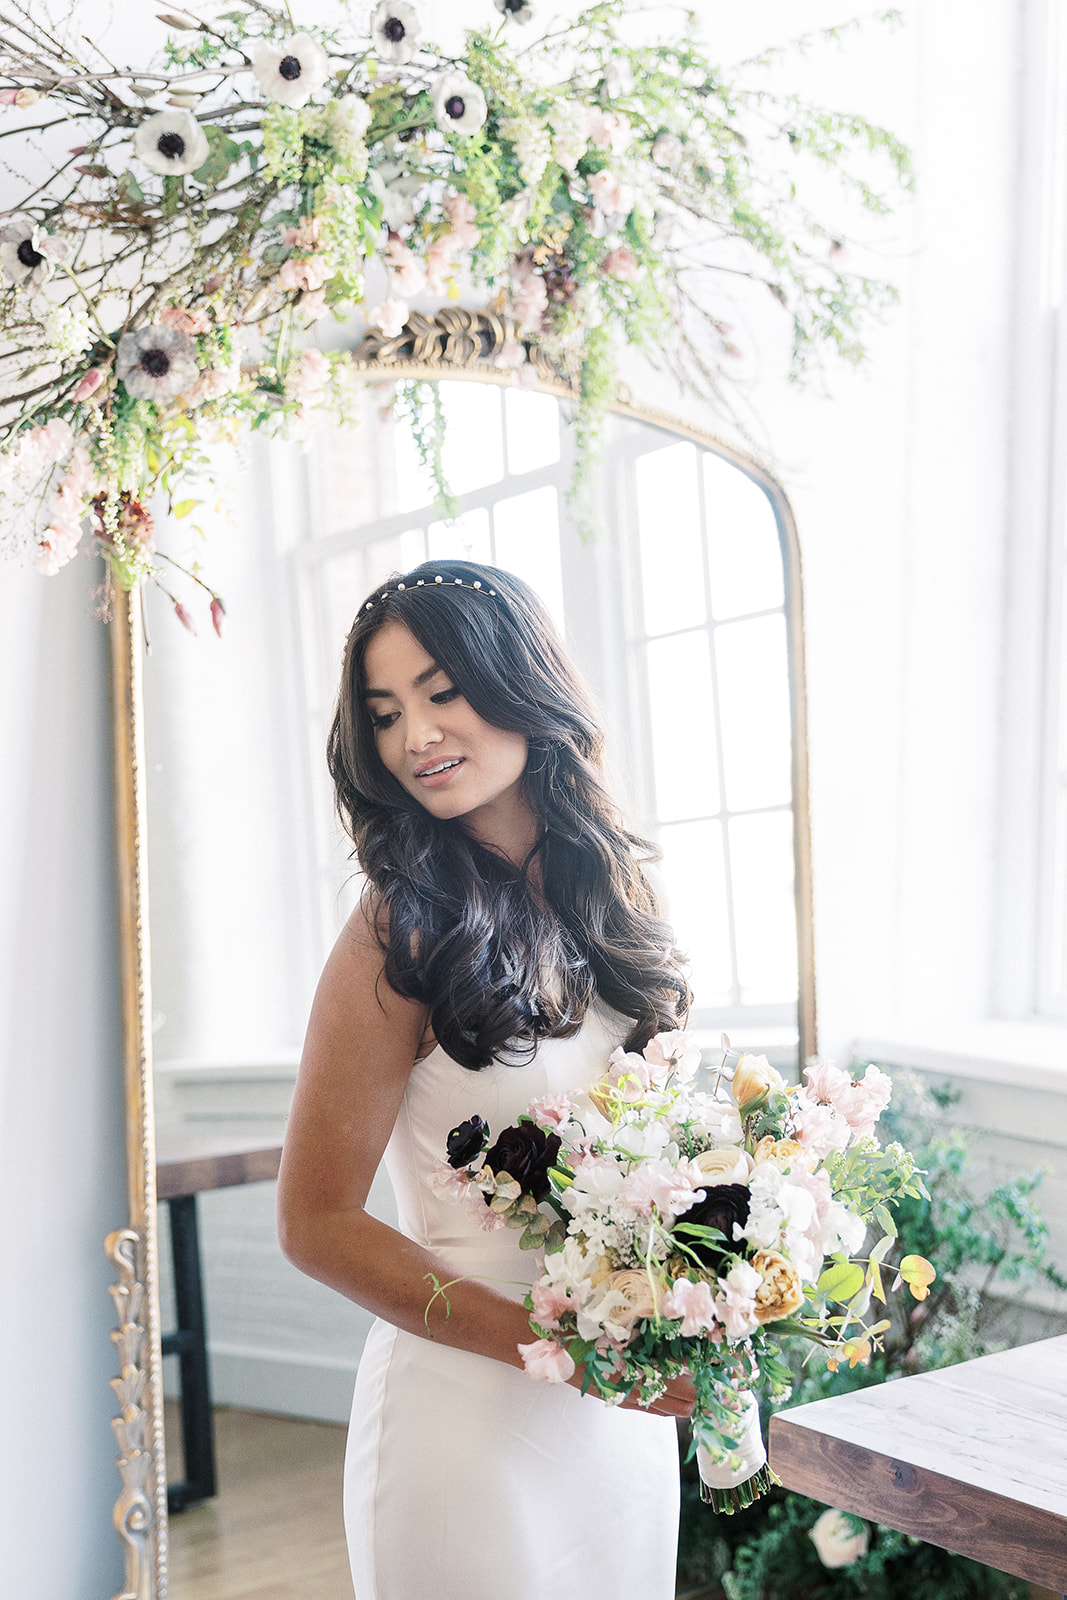 https://withlovecaila.com/wp-content/uploads/2021/04/Caila-Quinn-NYC-Bridal-Styled-Shoot-Kylee-Yee-210.jpg